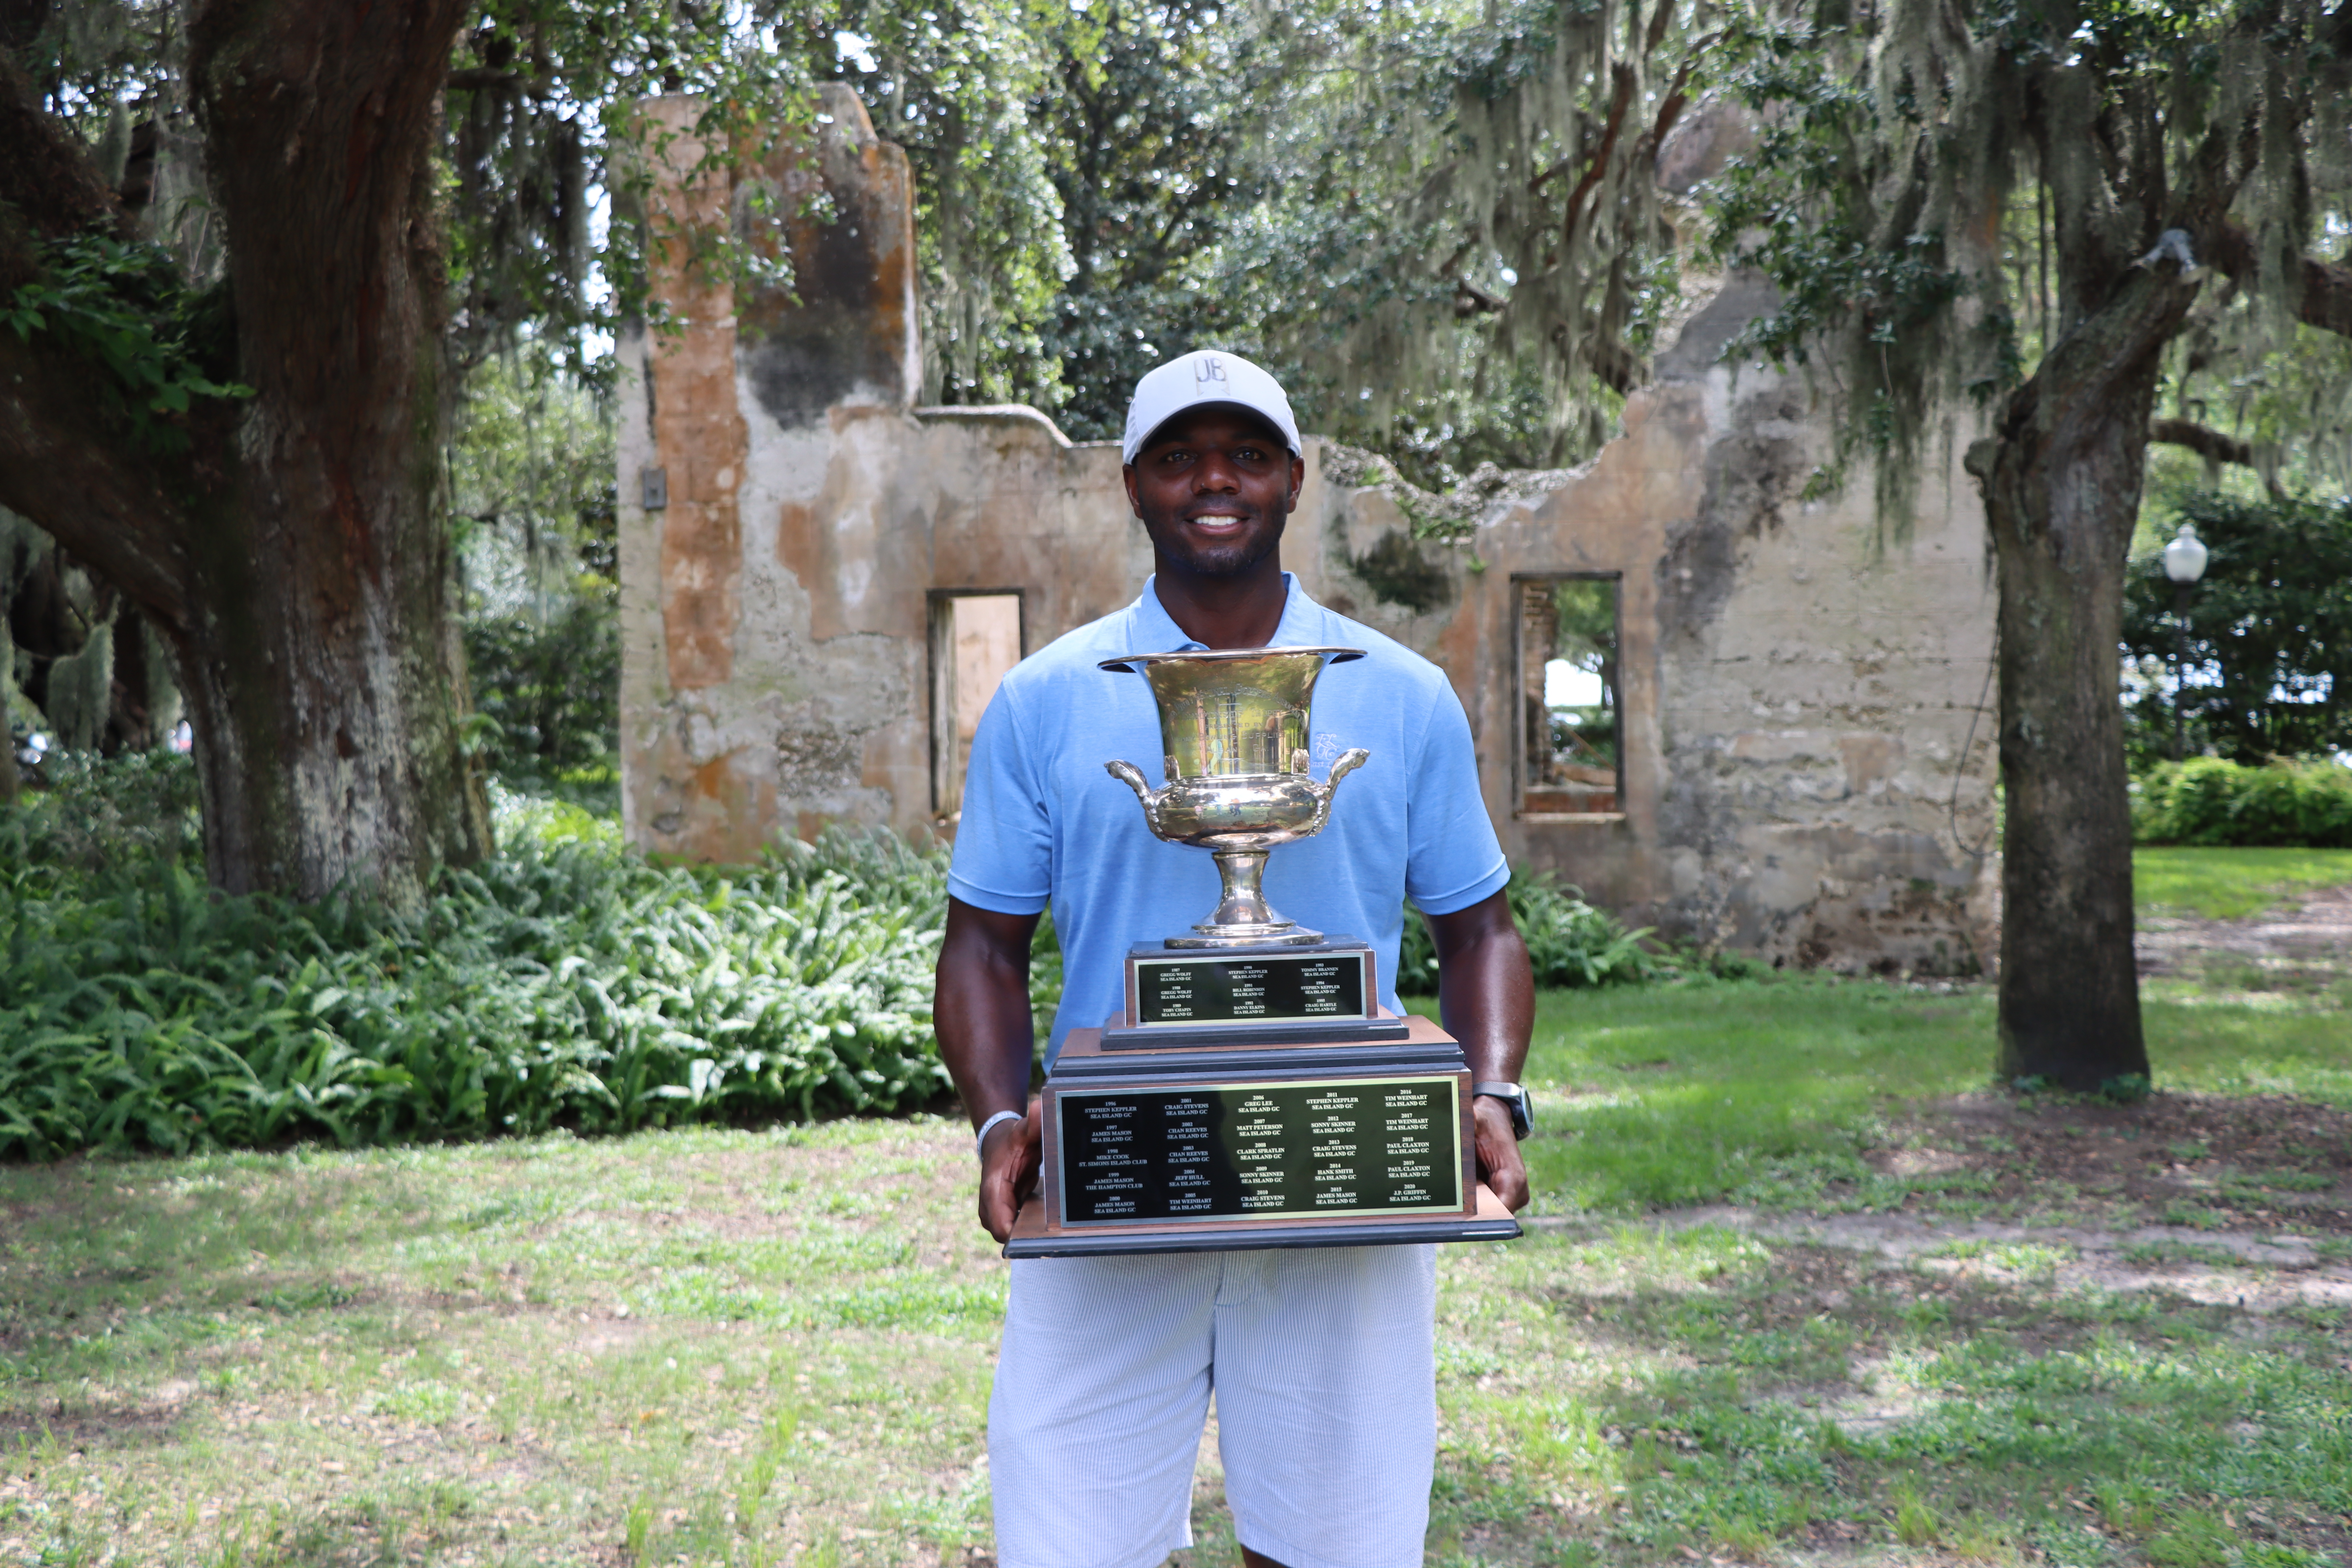 Local golf Jabir Bilal makes history with Georgia Section victory